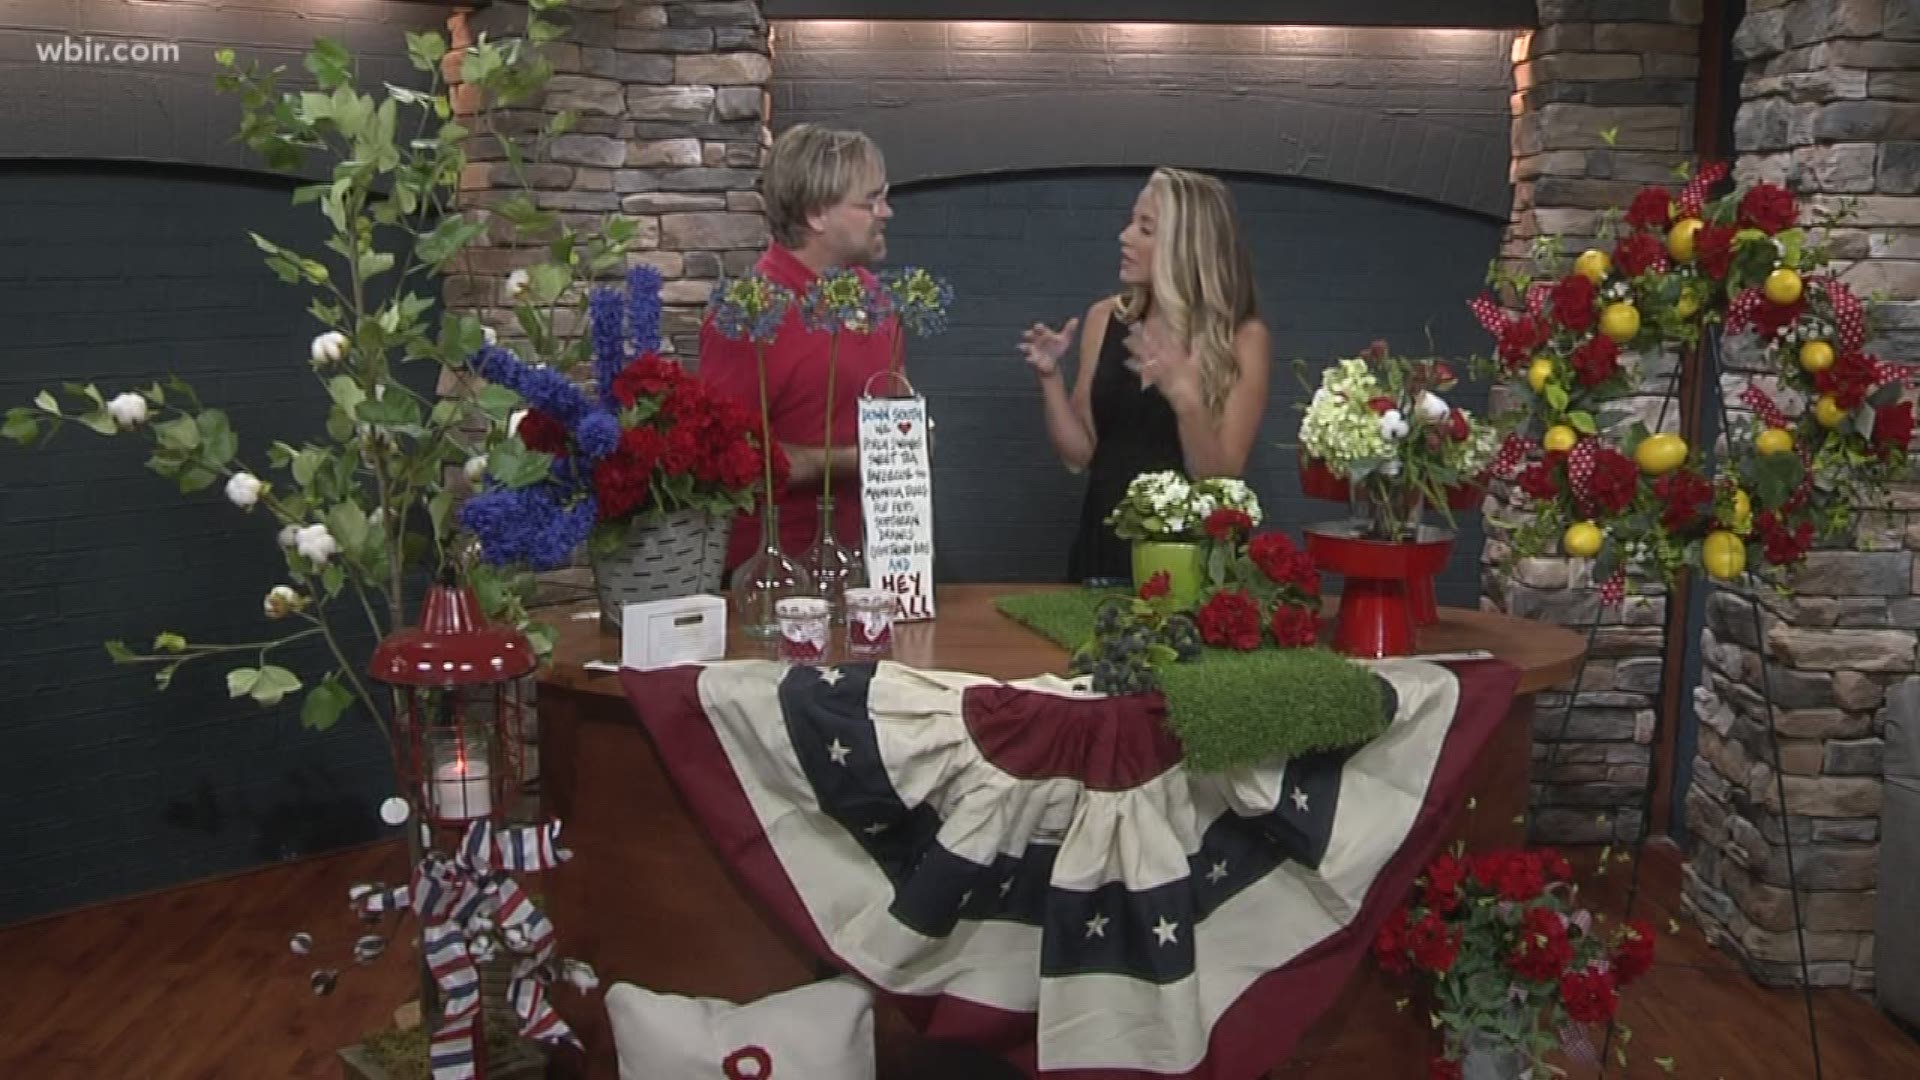 Sam Franklin shares some decorating tips for the 4th of July.